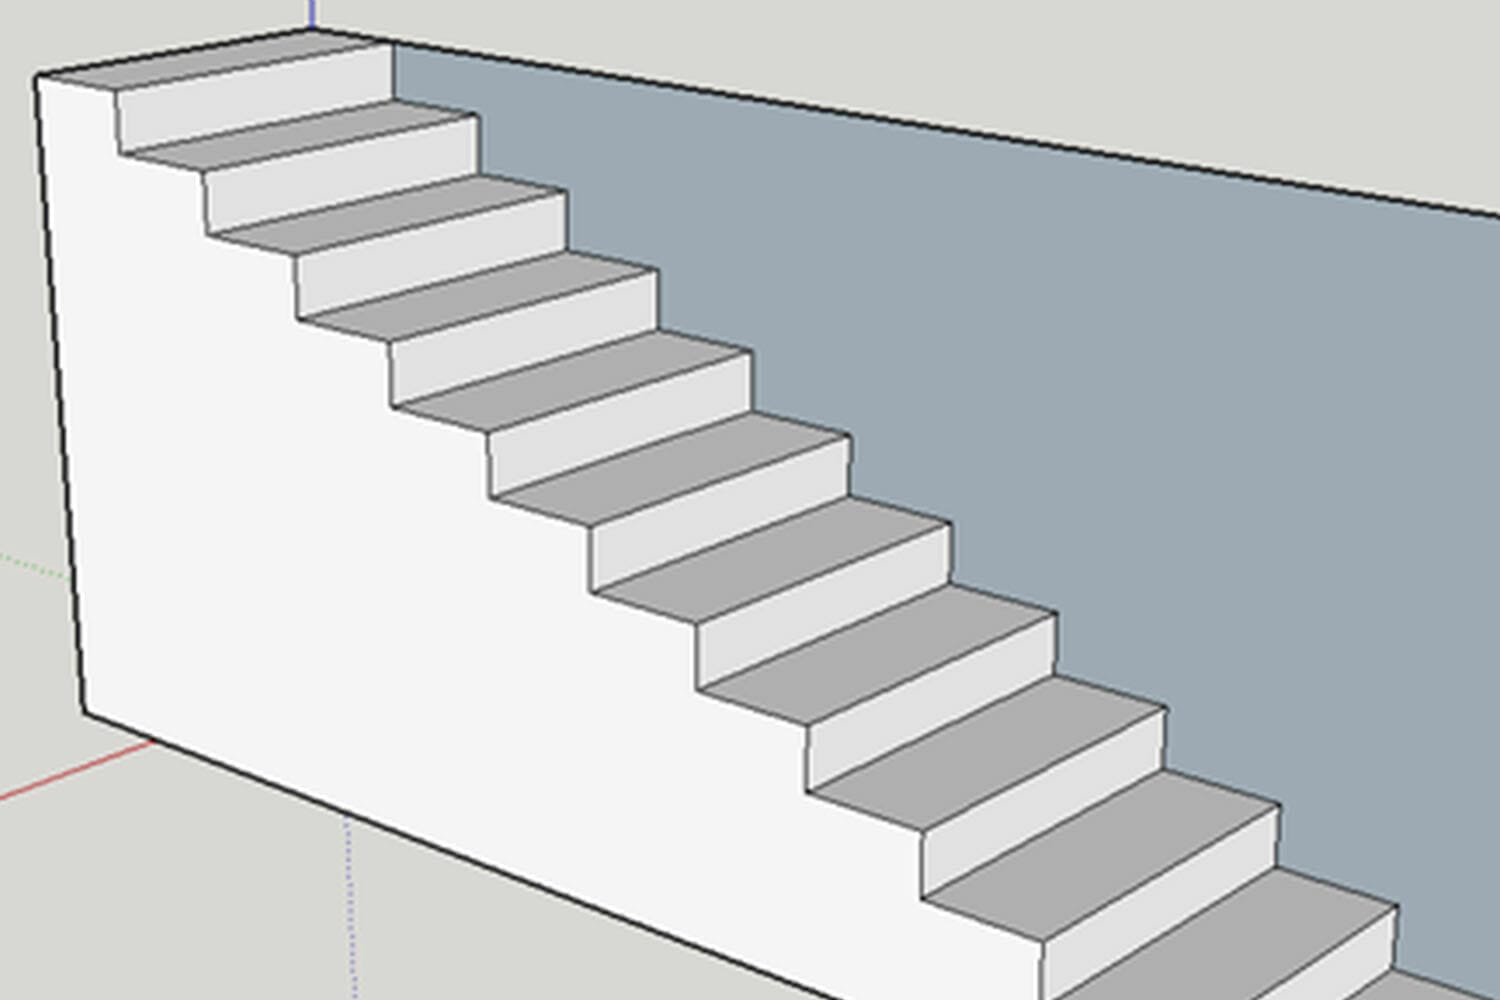 Optical illusion of grey and white staircase divides the internet - so what do you see?